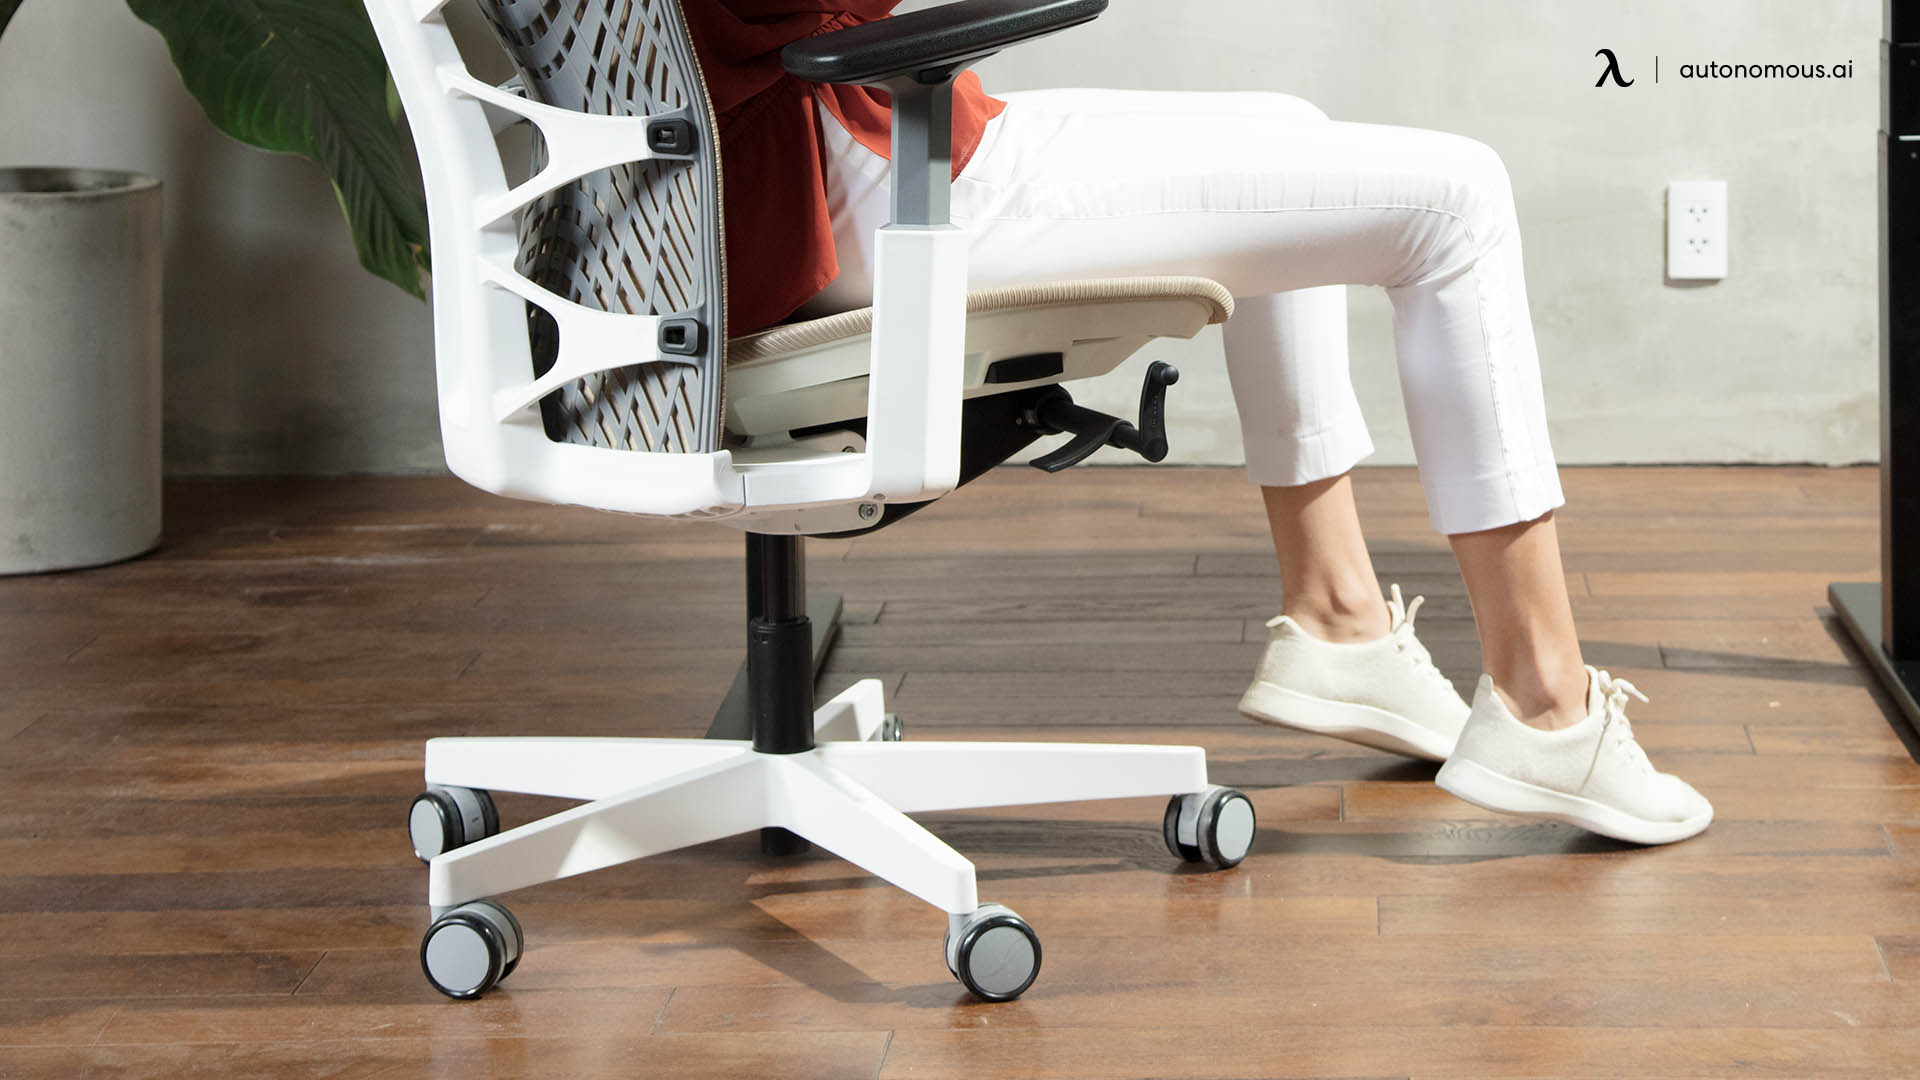 8 of the Best Caster Wheels for Office Chairs to Buy in 2022